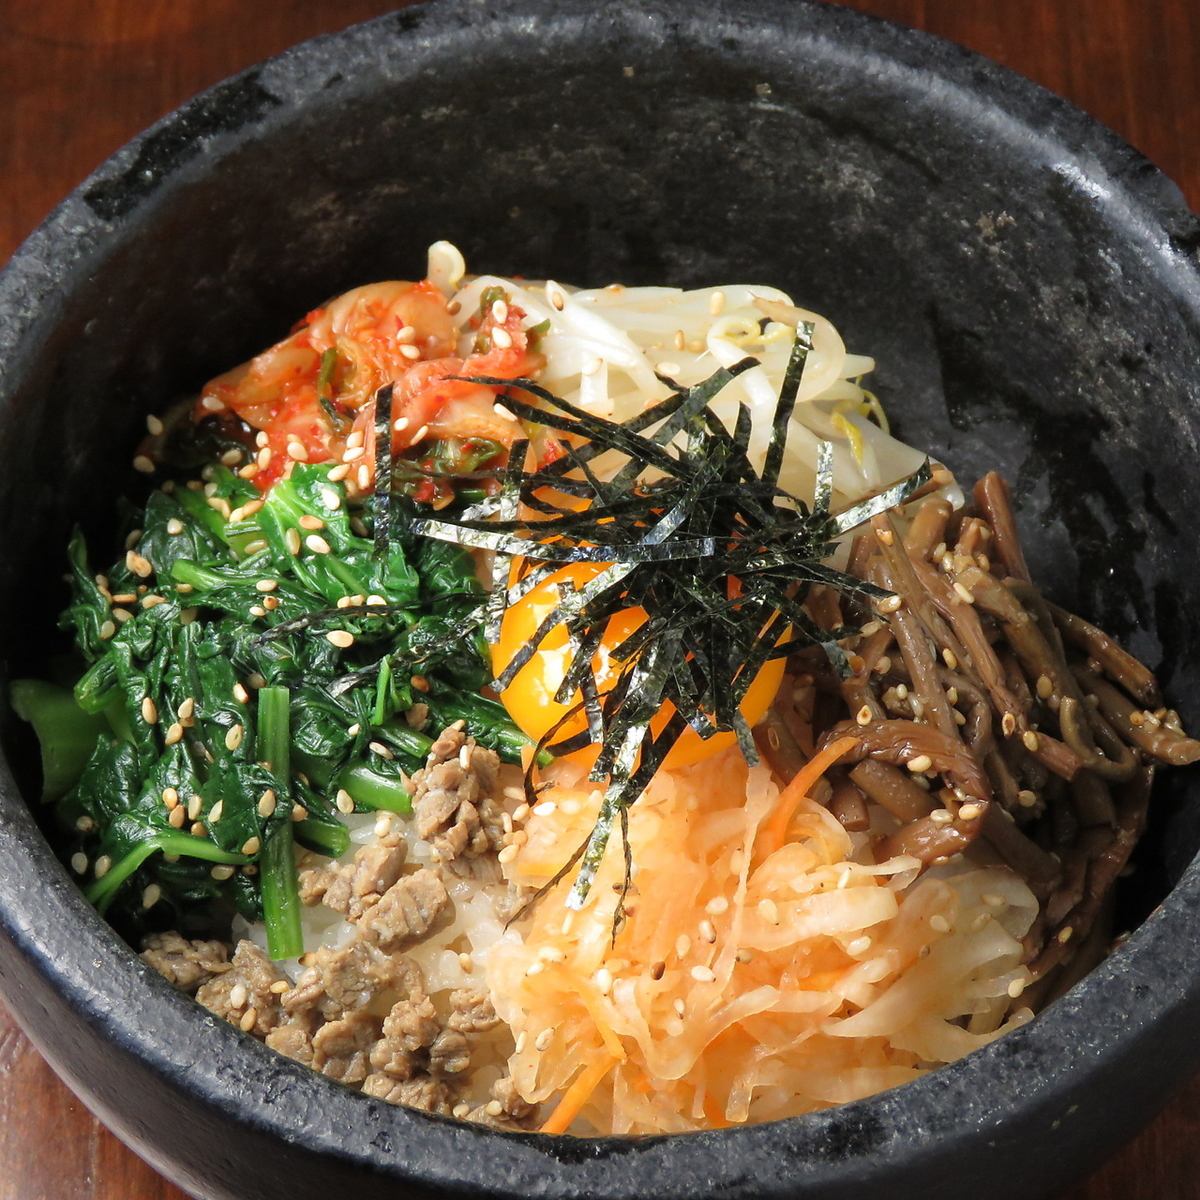 The piping hot stone-grilled bibimbap will whet your appetite! It's a popular finishing dish!